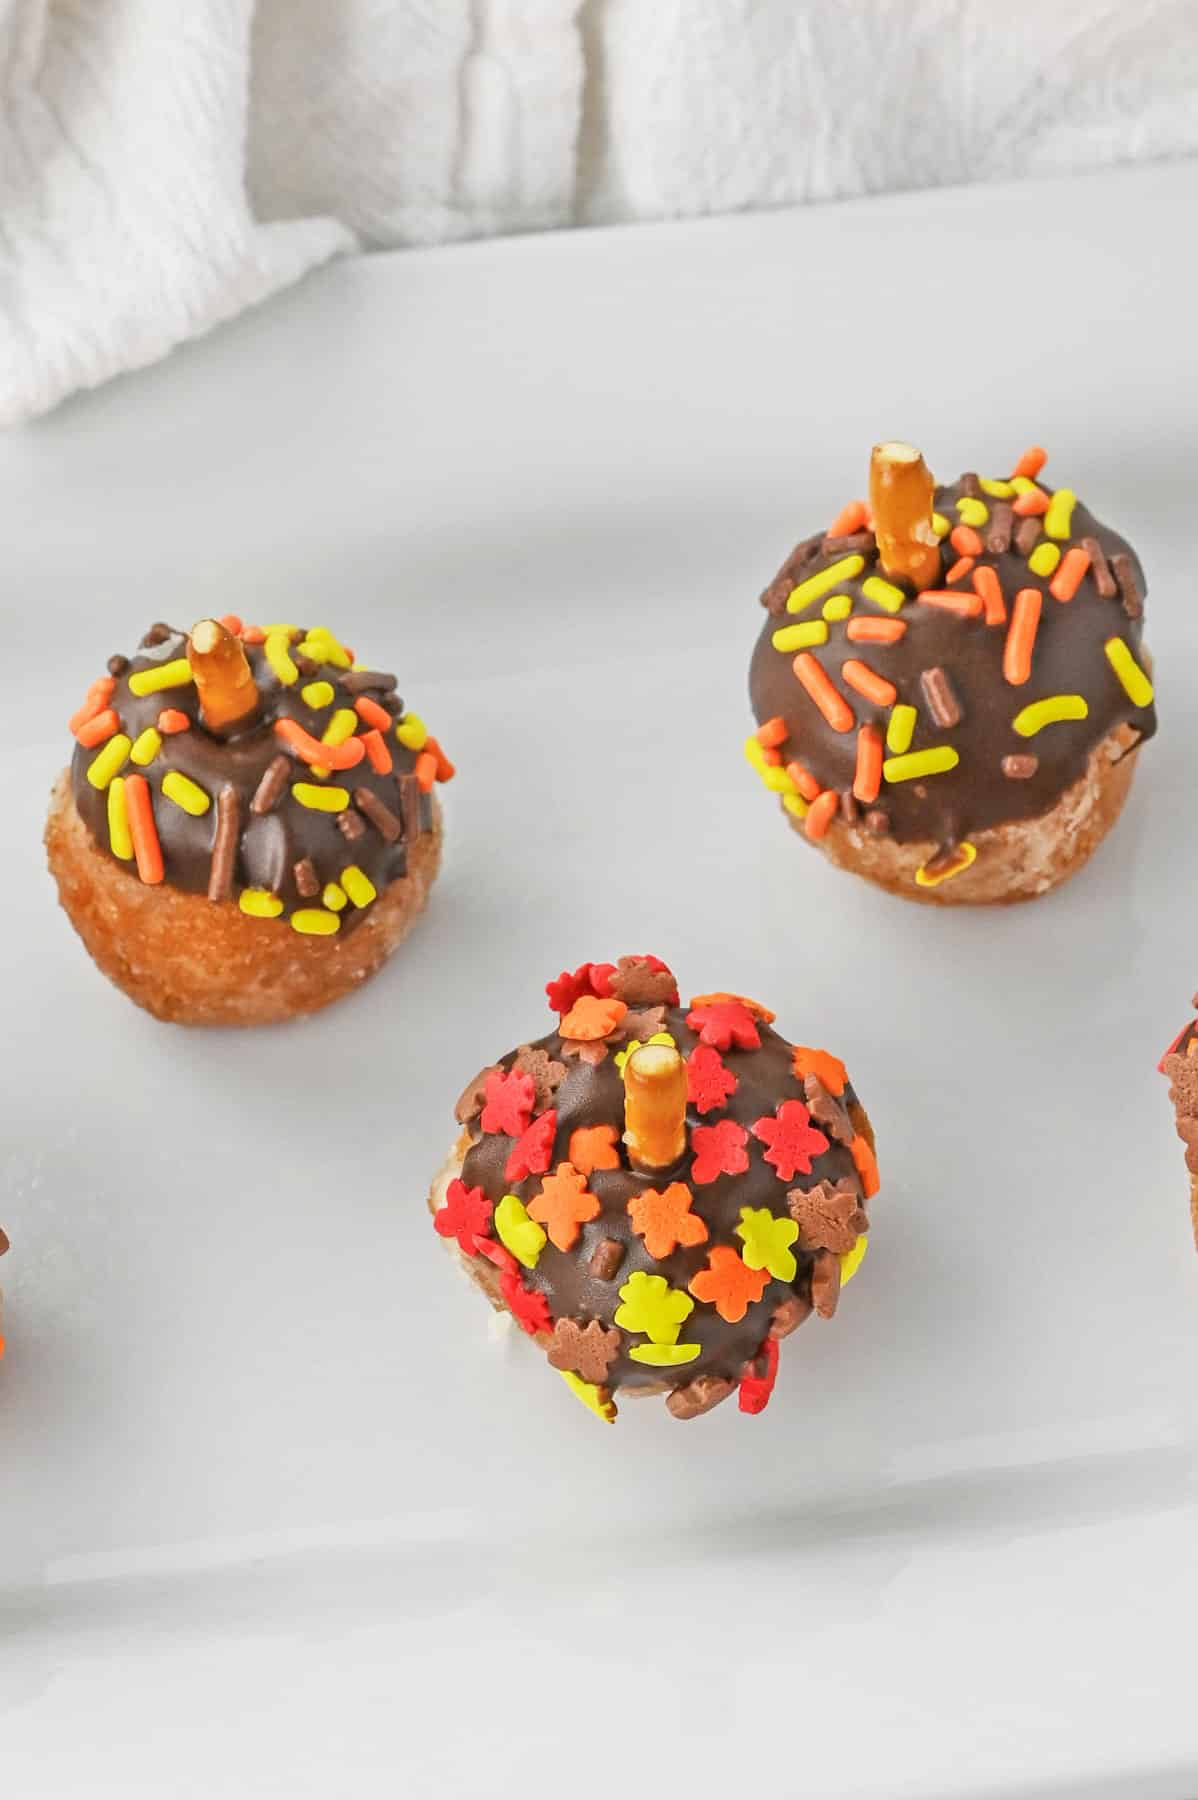 acorn donut holes decorated with chocolate and sprinkles on a plate.